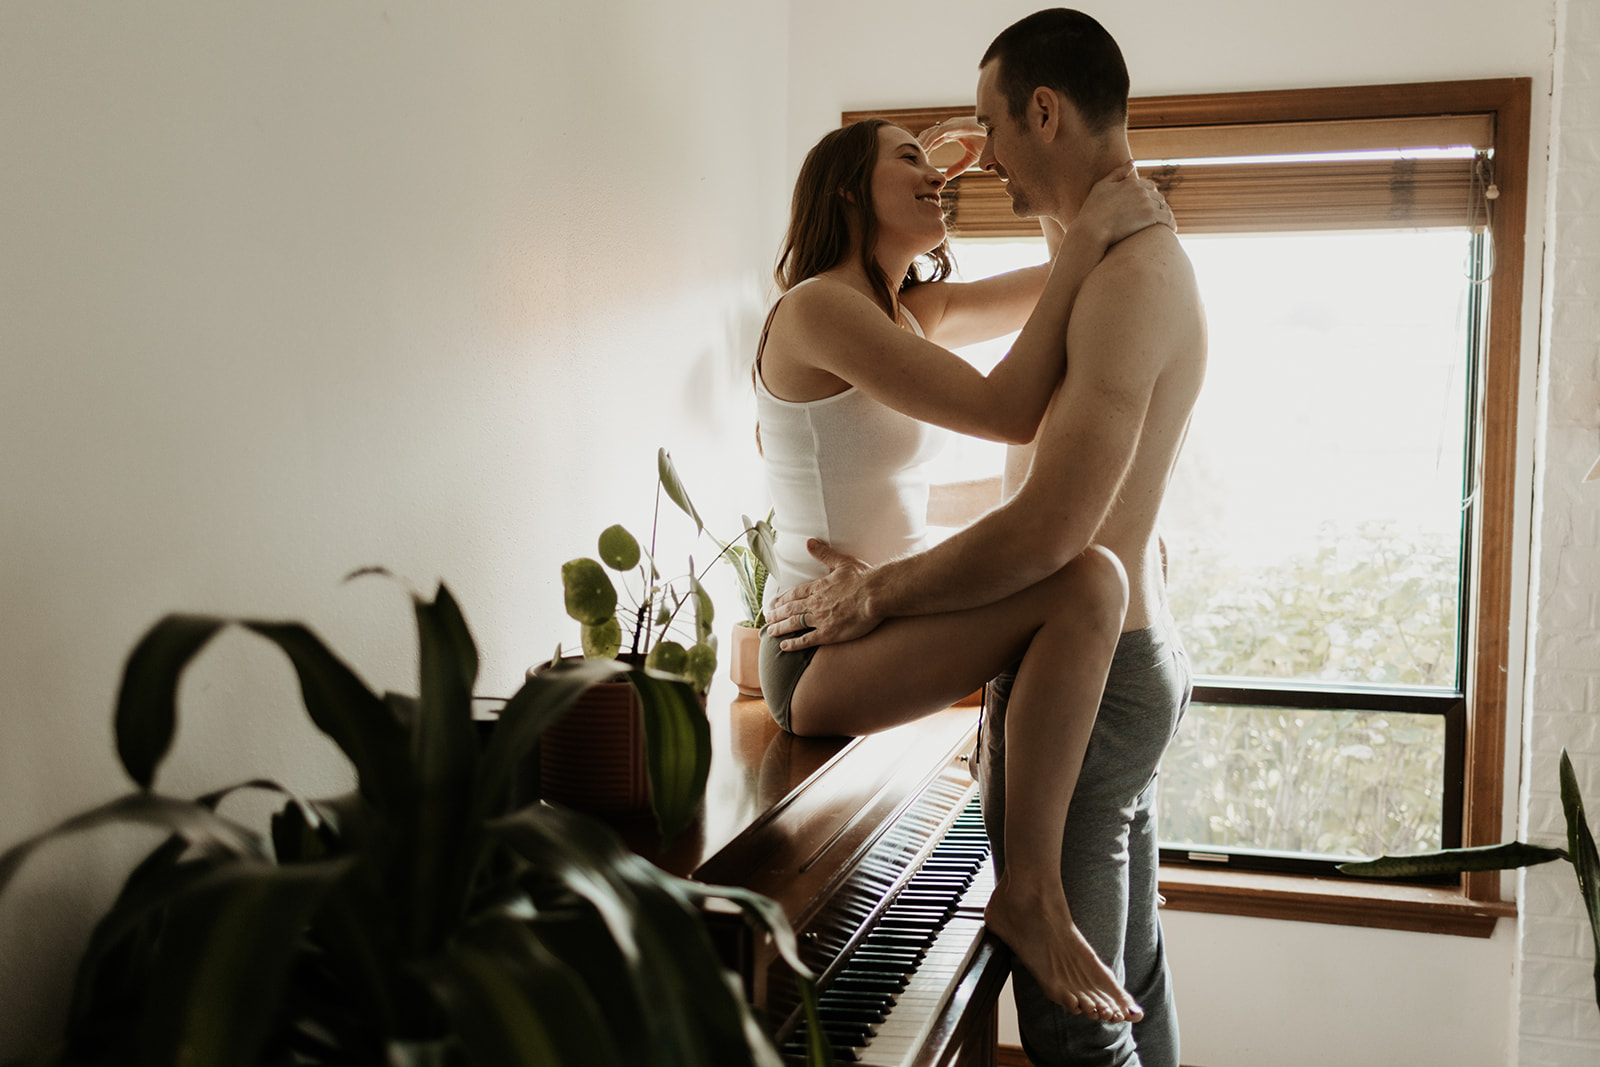 woman sits on piano with plants around her while man stands between her legs holding her